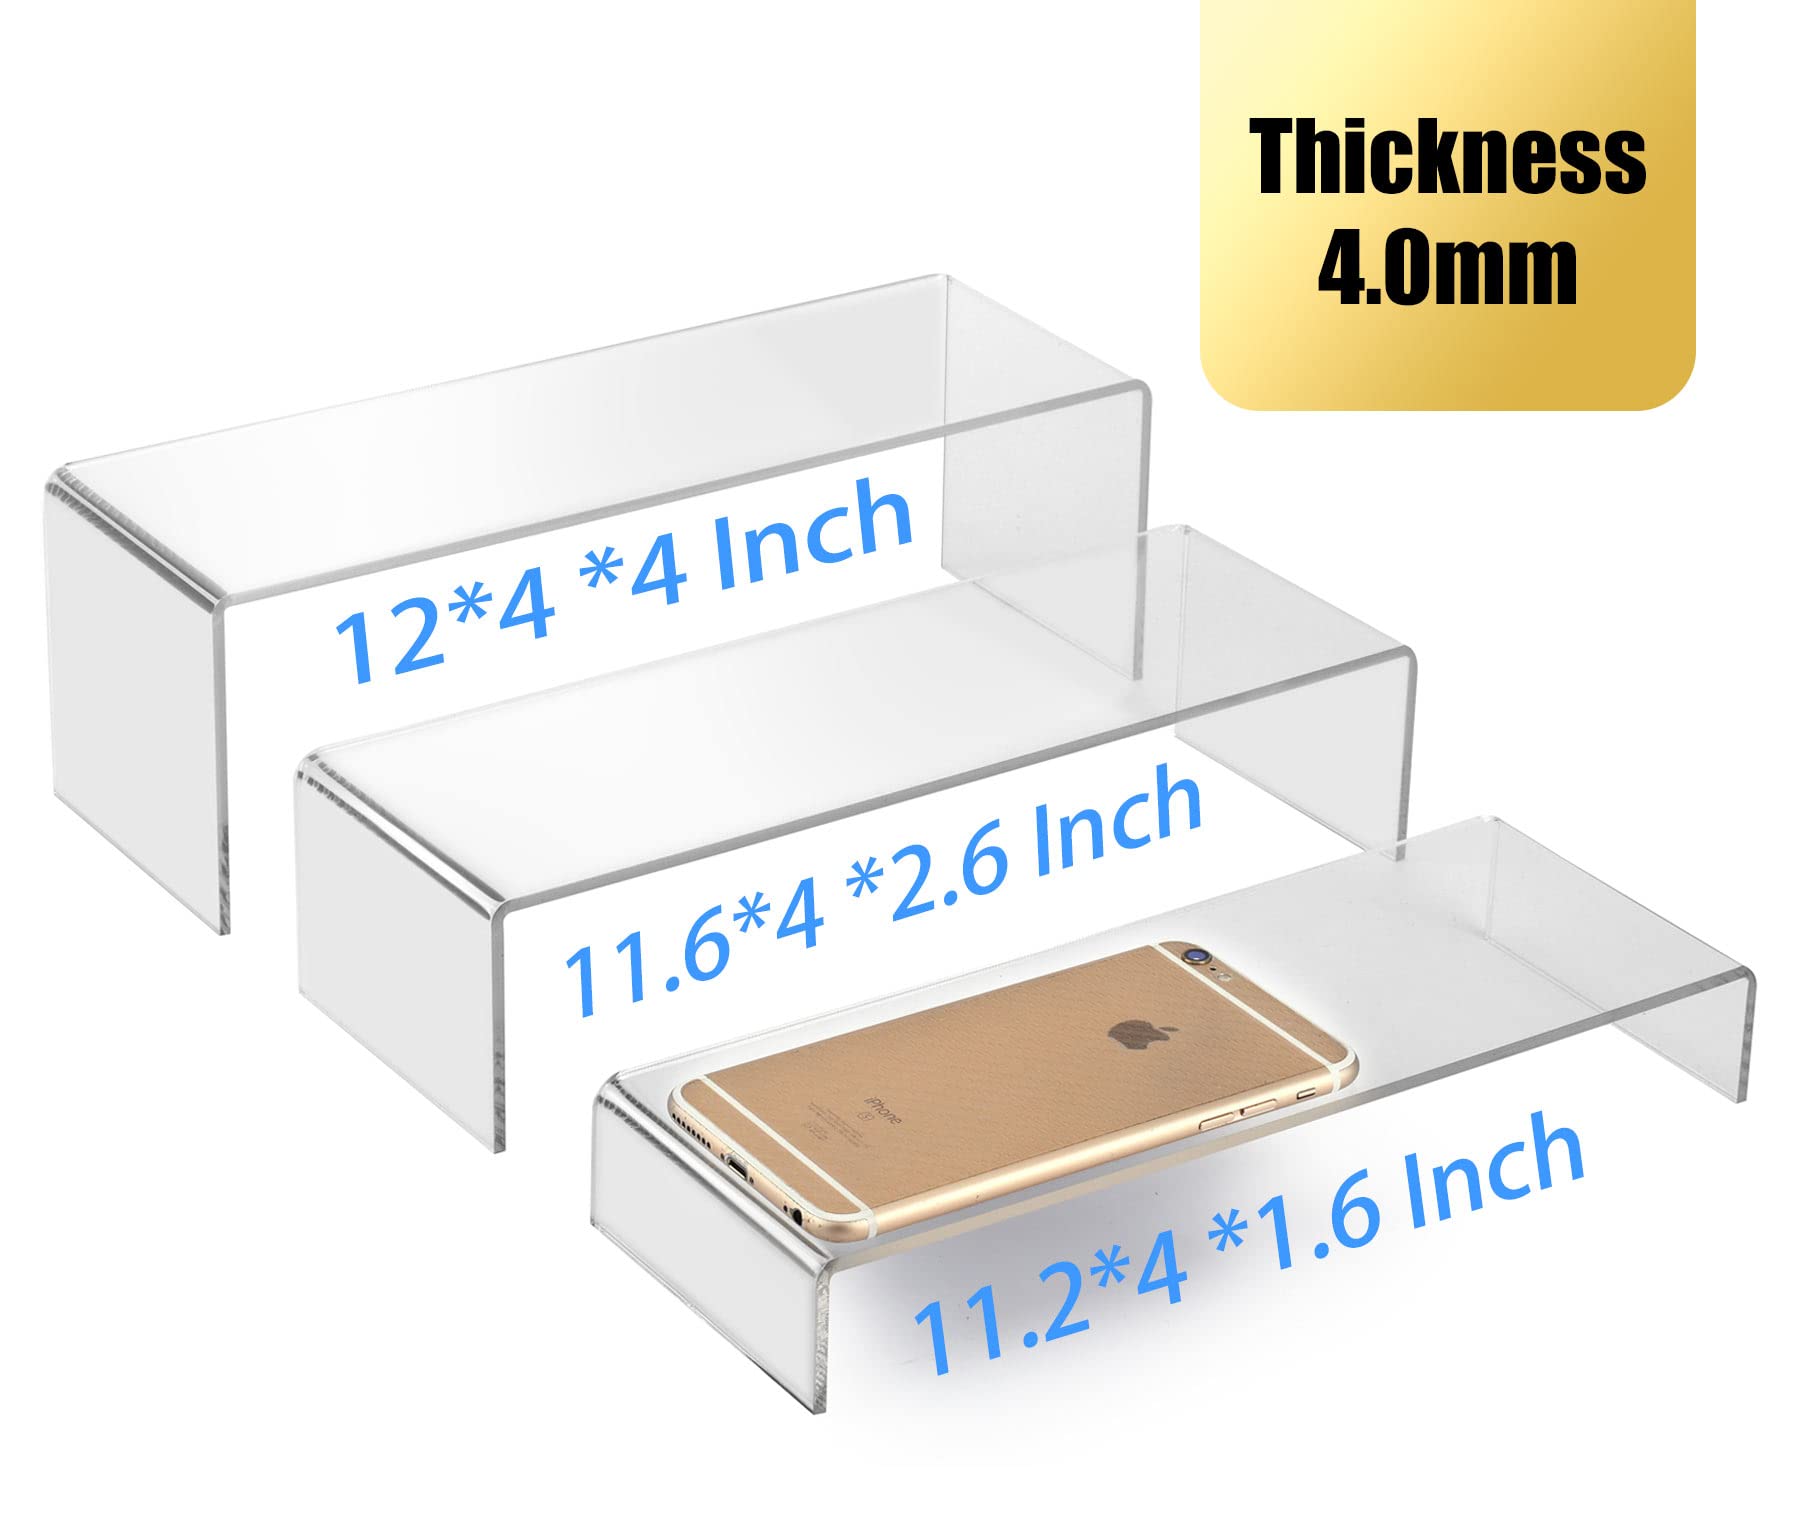 ANDGOO Large Acrylic Risers Desktop Display Stand for Organize and Decoration, Set of 2